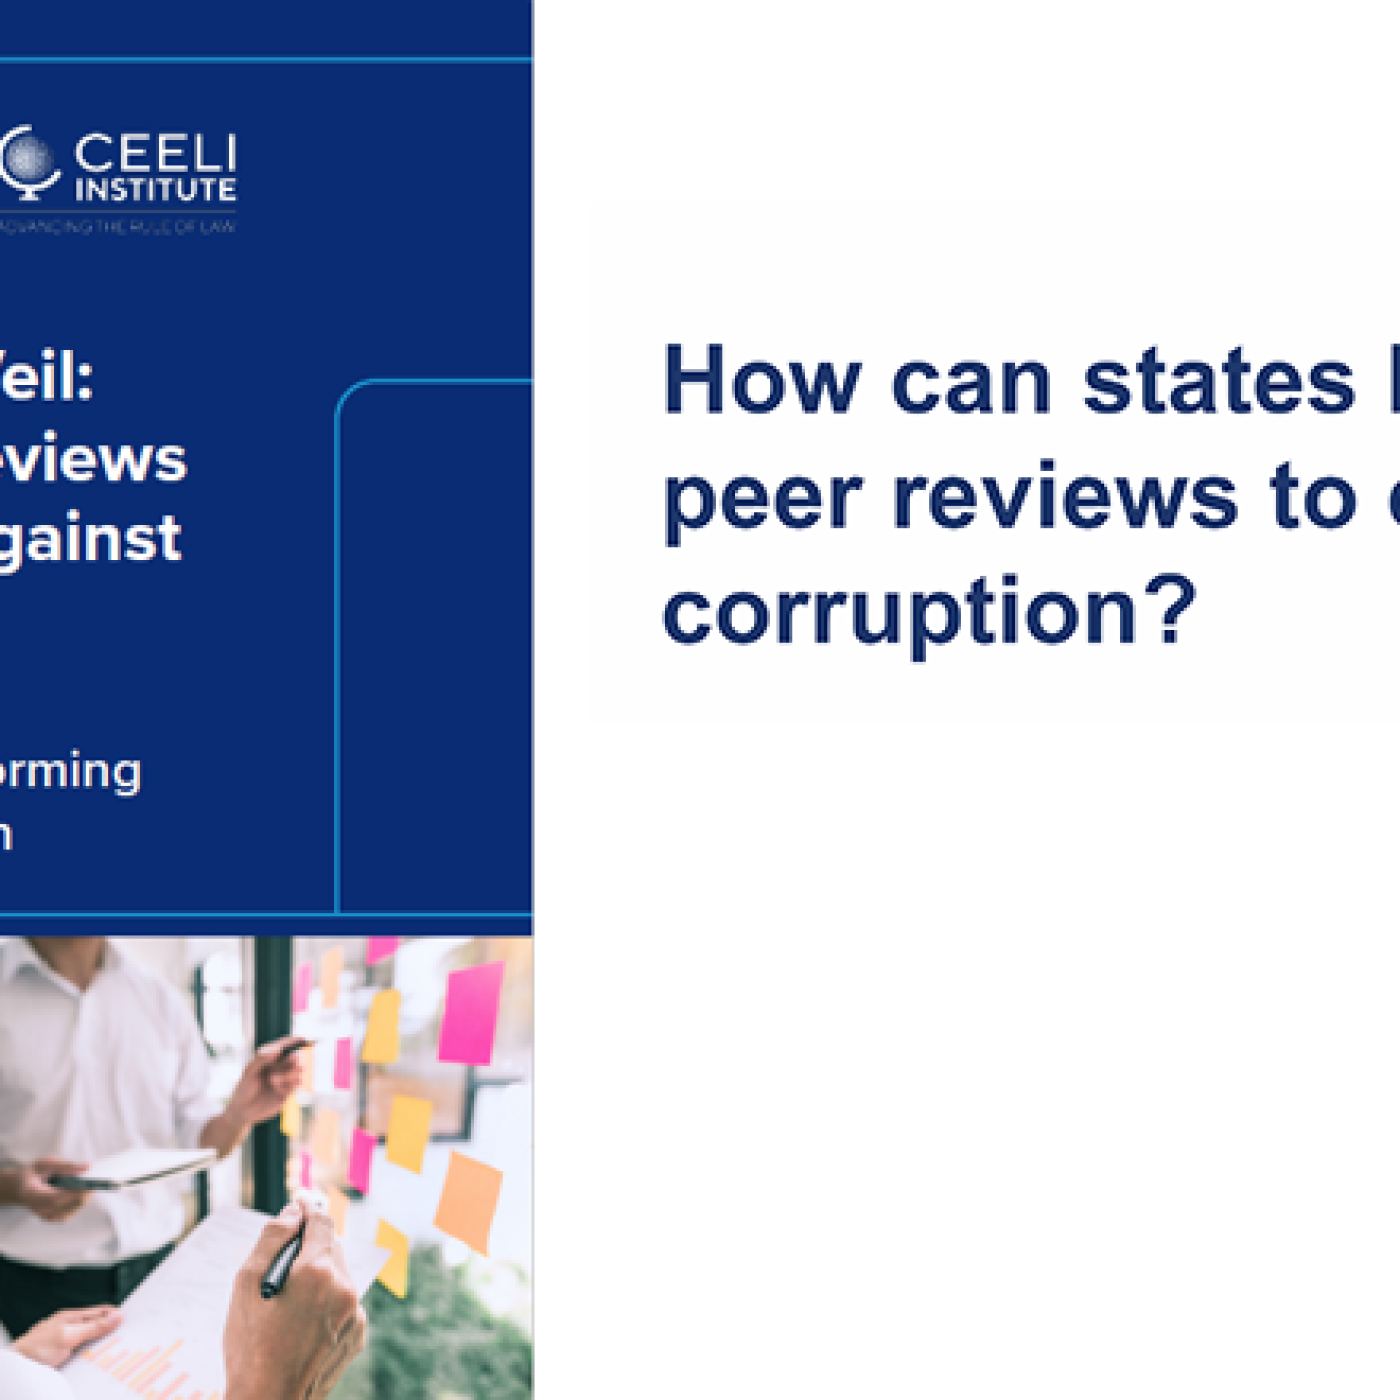 How can states better utilize peer reviews to combat corruption?